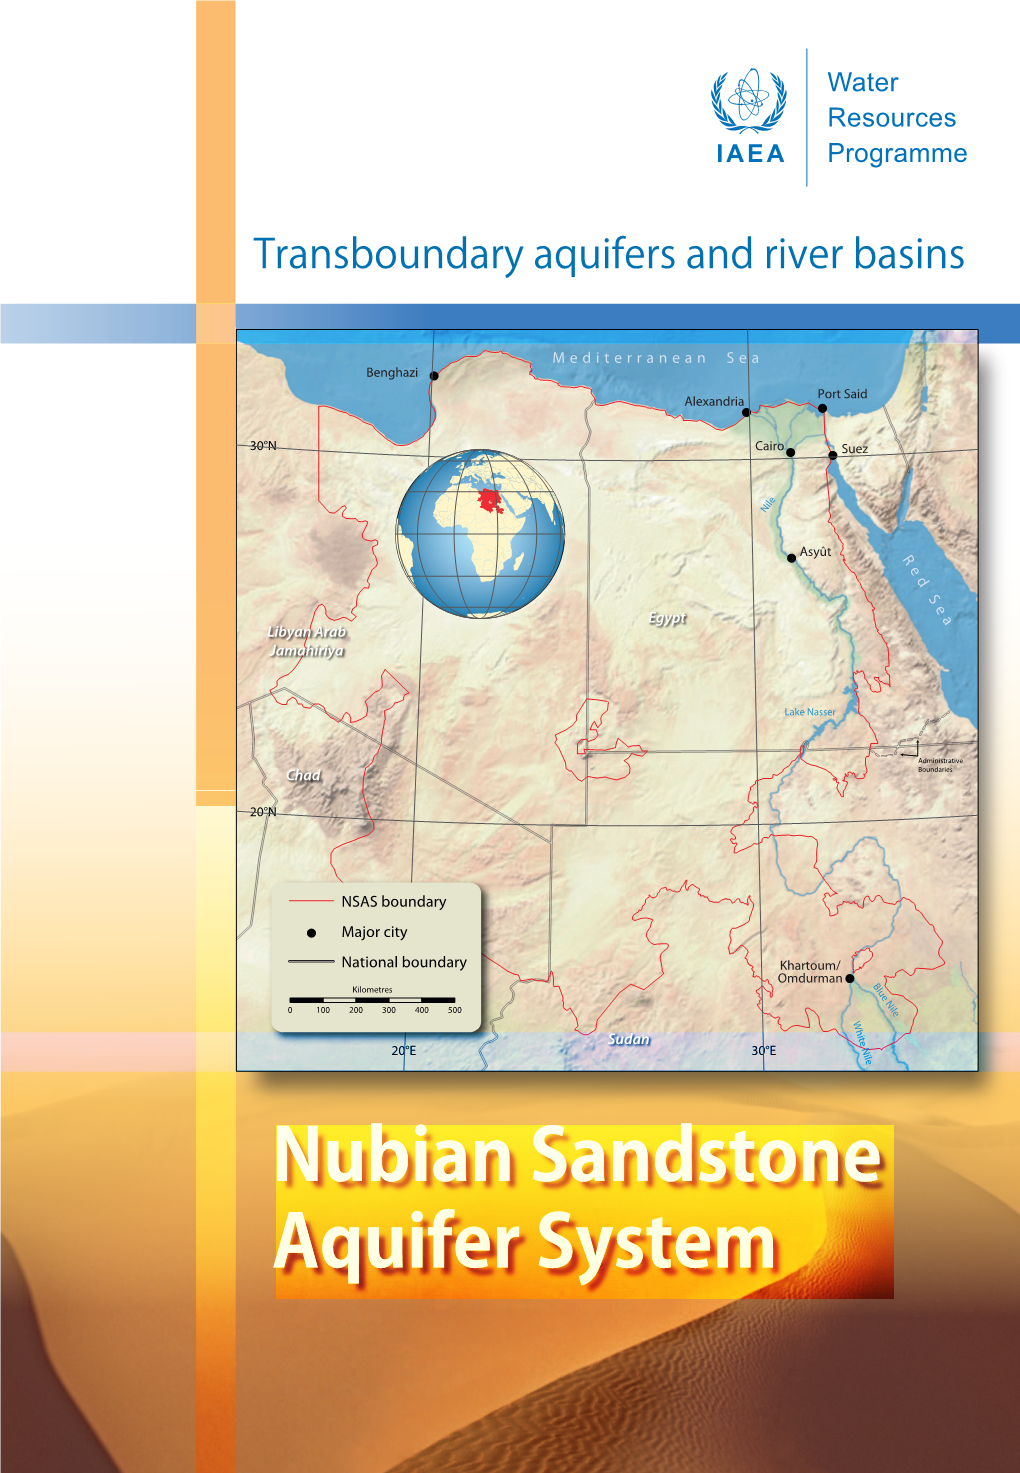 Nubian Sandstone Aquifer System Isotopes and Modelling to Support the Nubian Sandstone Aquifer System Project